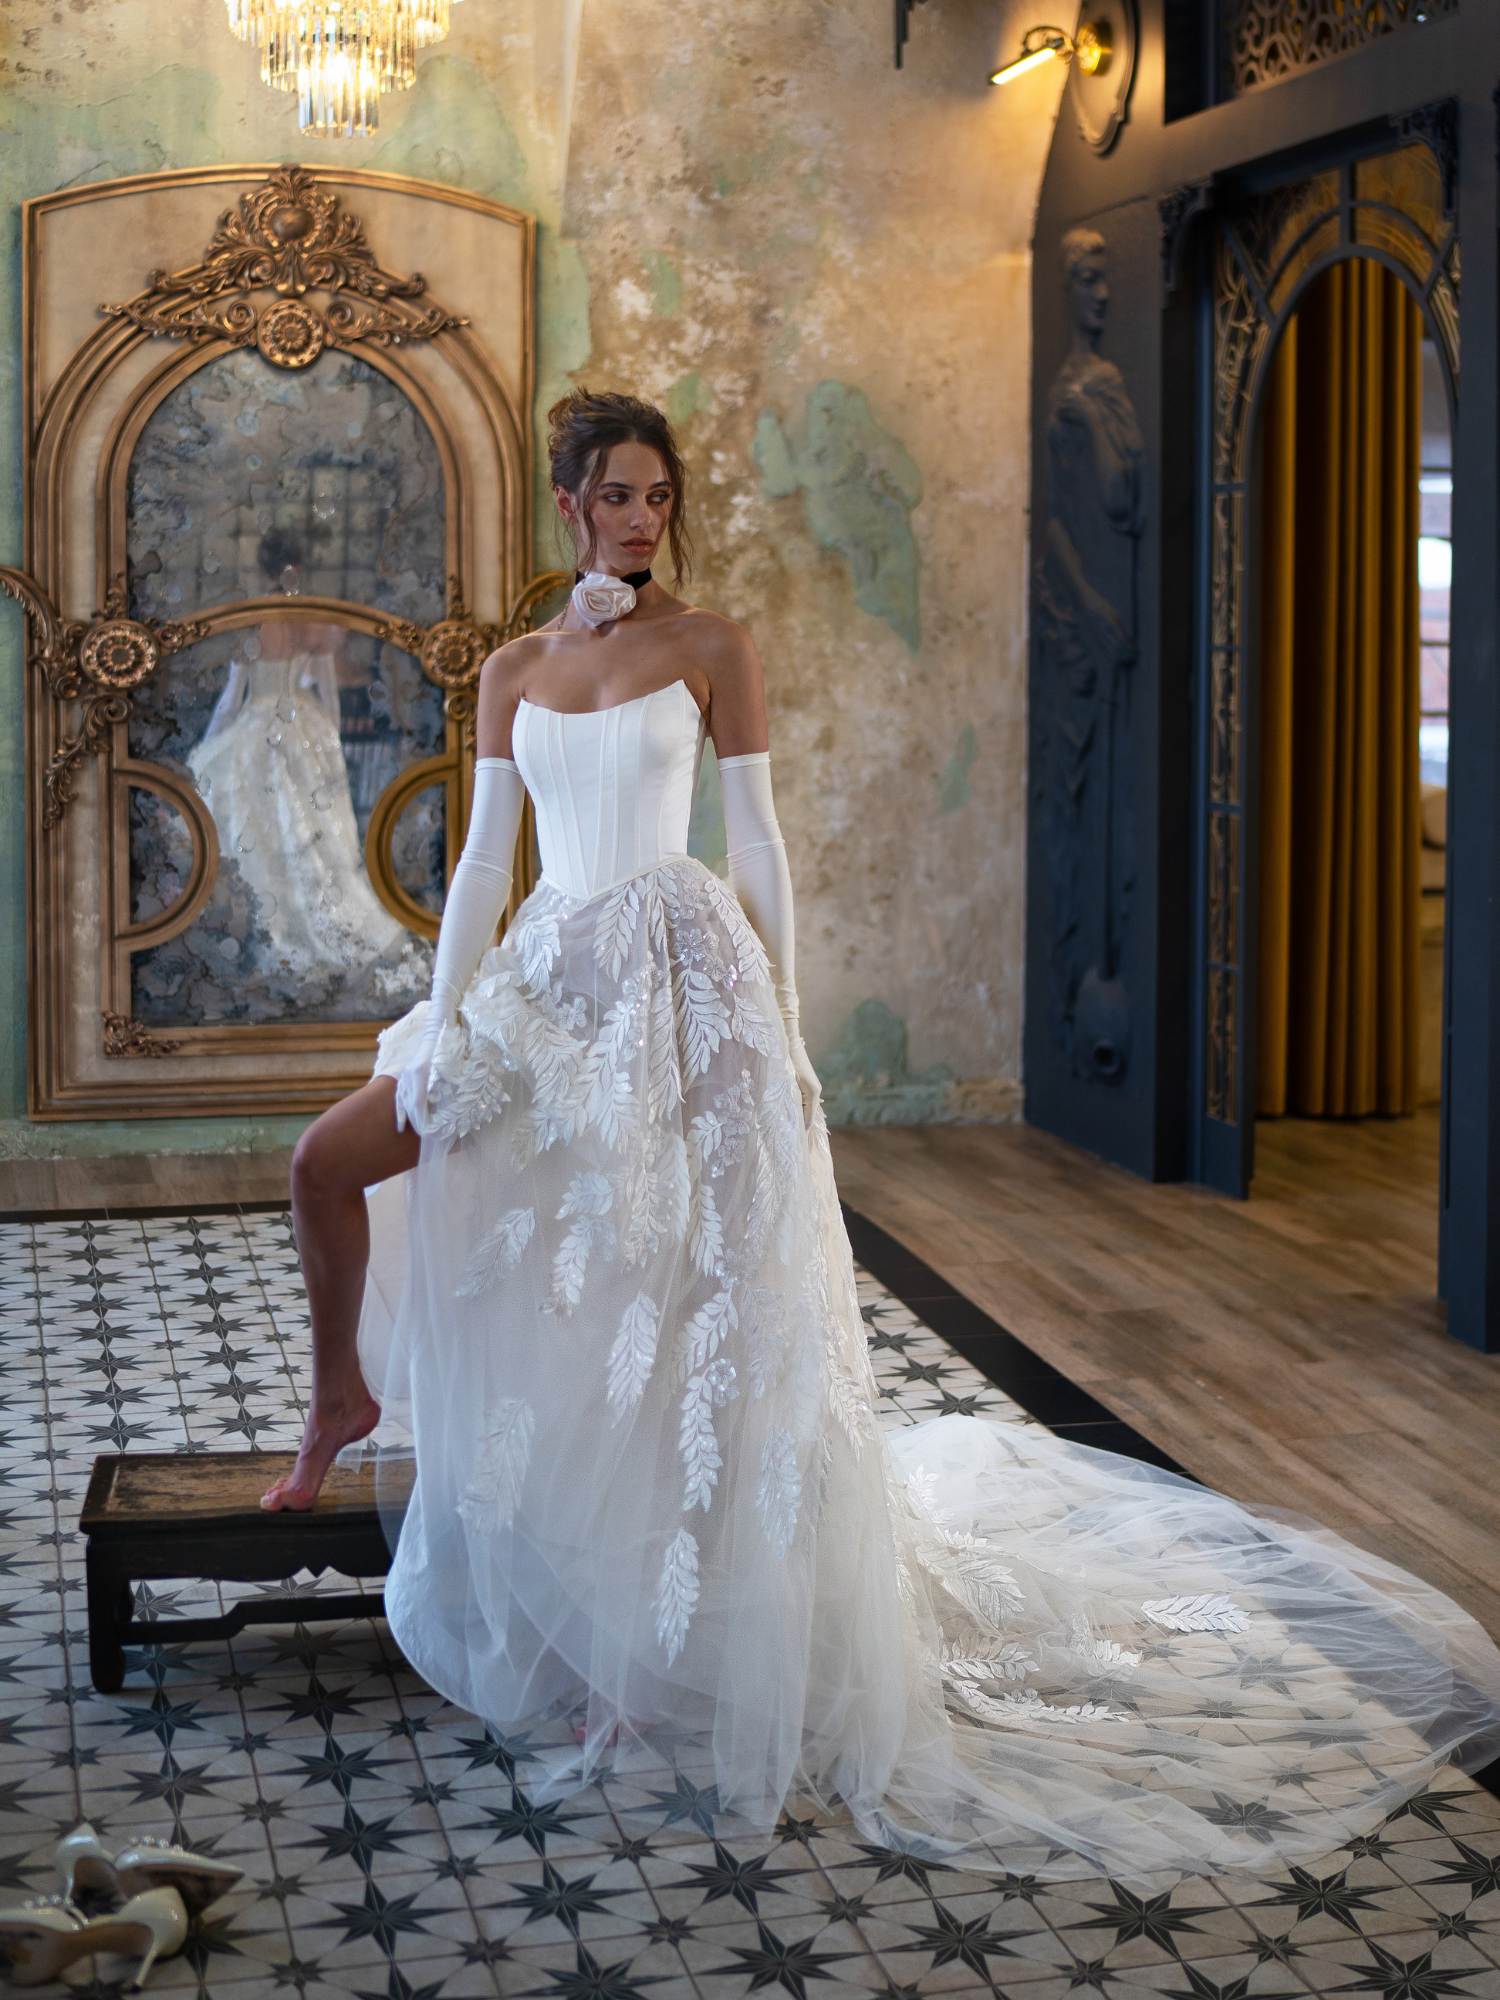 A model poses in an opulent room wearing a contemporary strapless wedding dress with long sleeves and detailed white leaf embroidery on the skirt and train, highlighting a unique wedding dress style by Papilio Boutique.